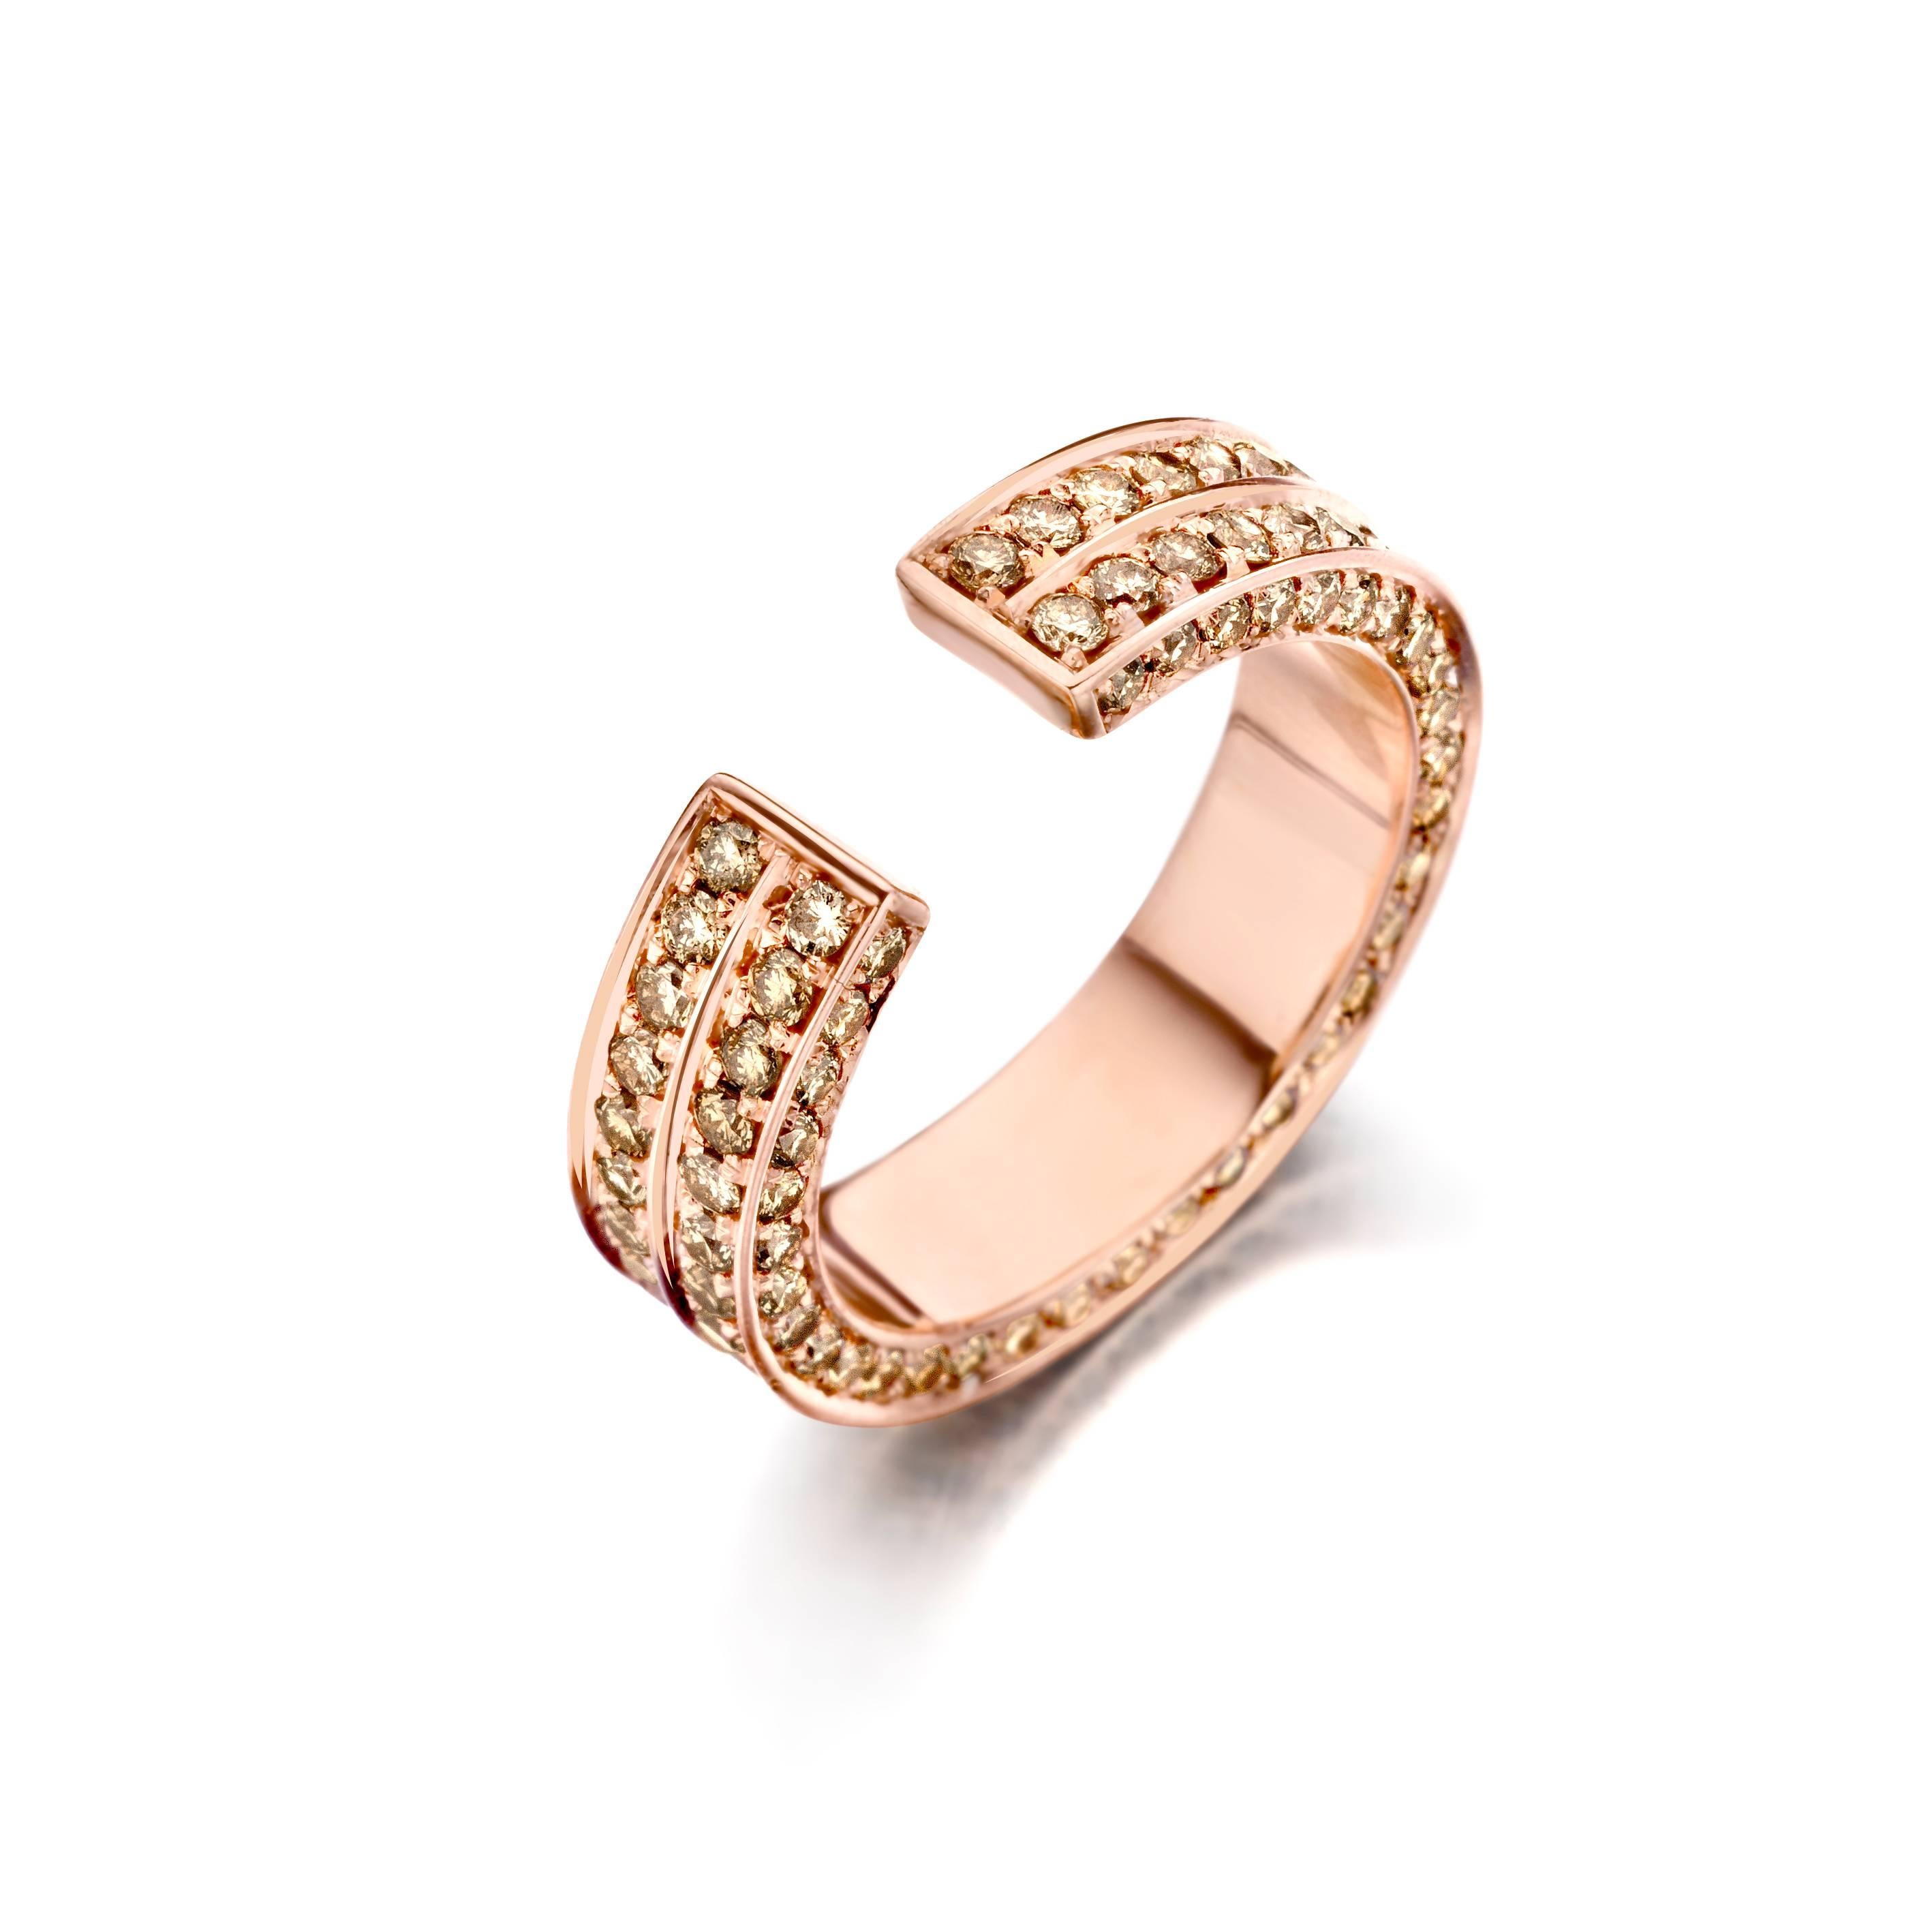 The BRUTE 18-karat rose gold ring has the appearance of two styles stacked together. Expertly handset with 2.43ct natural brown diamonds, this piece is sure to sparkle from all angles. The rose gold band wraps symmetrically around the finger and